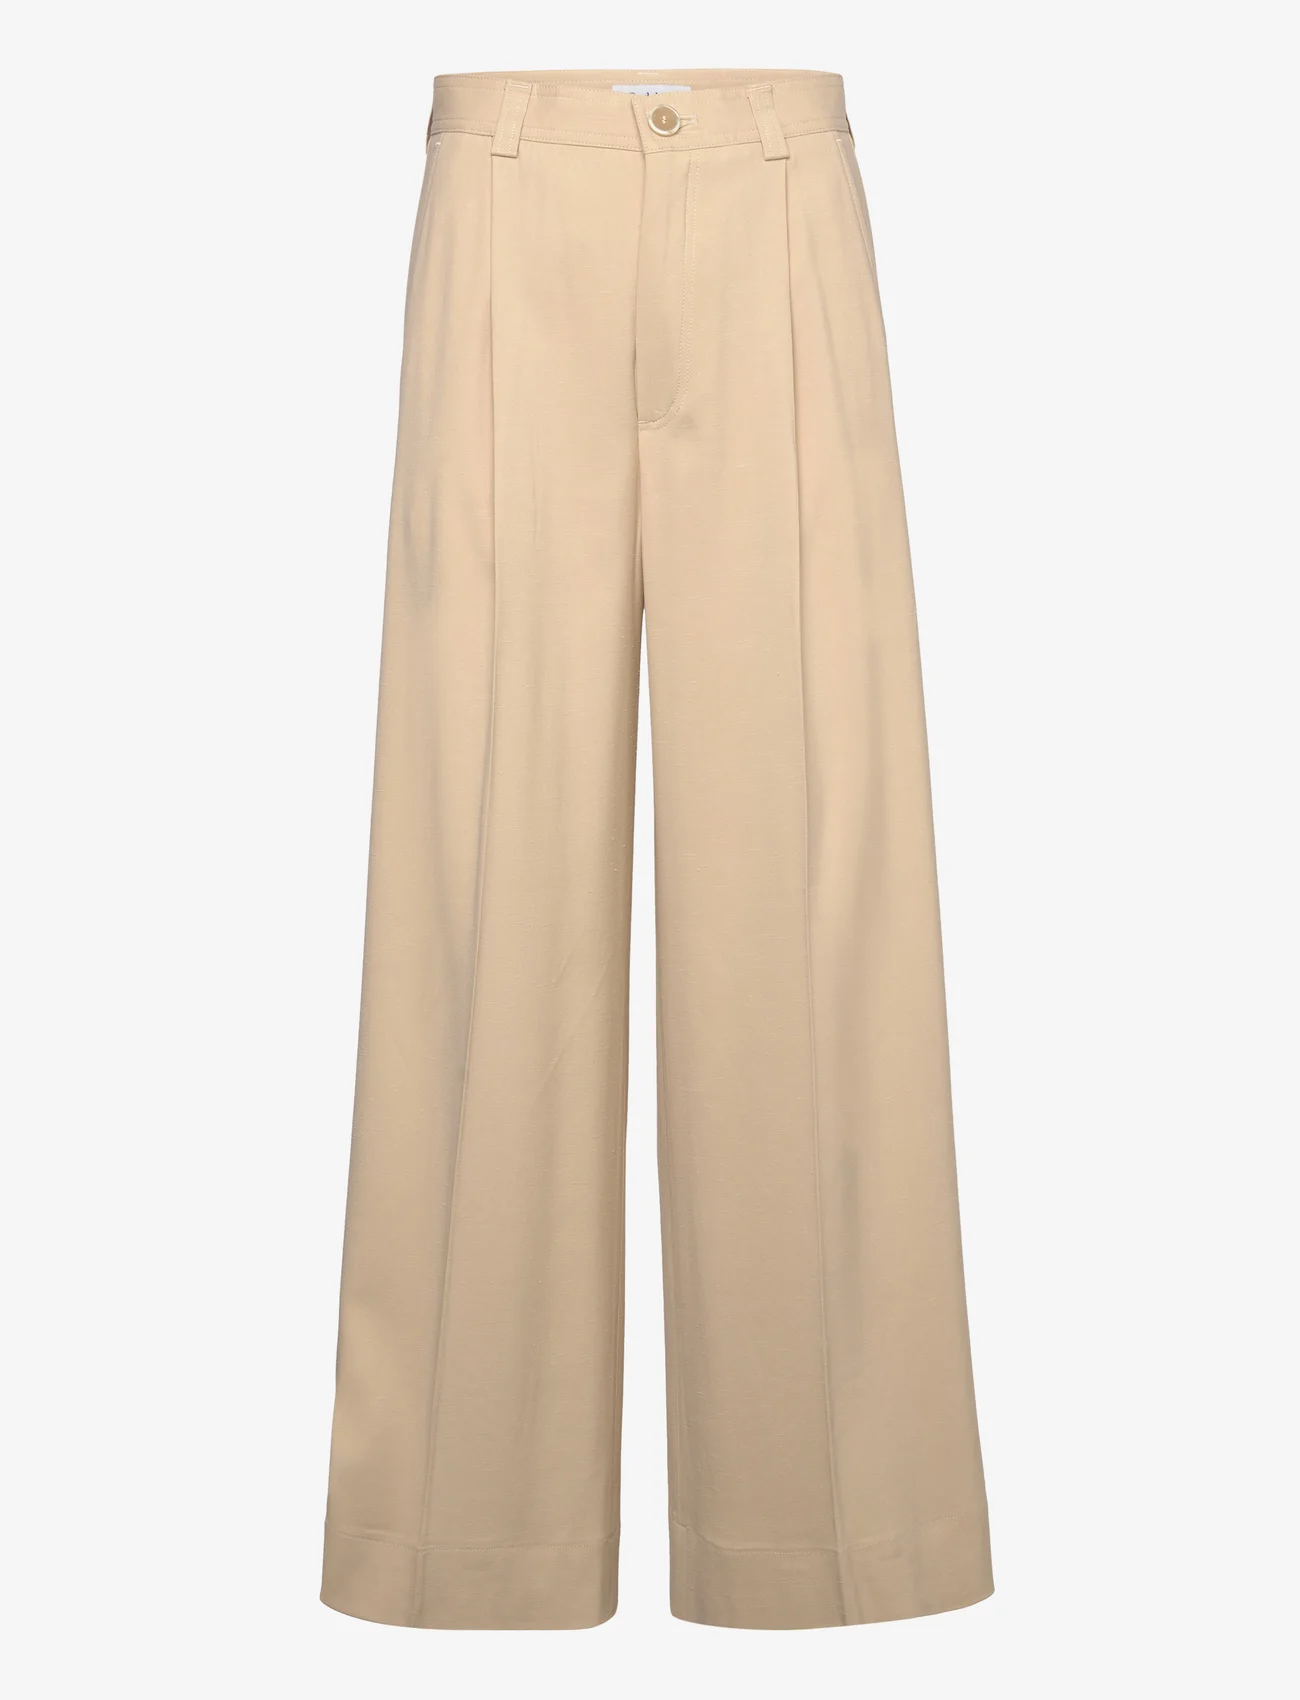 RODEBJER - Rodebjer Addie - wide leg trousers - sand - 0